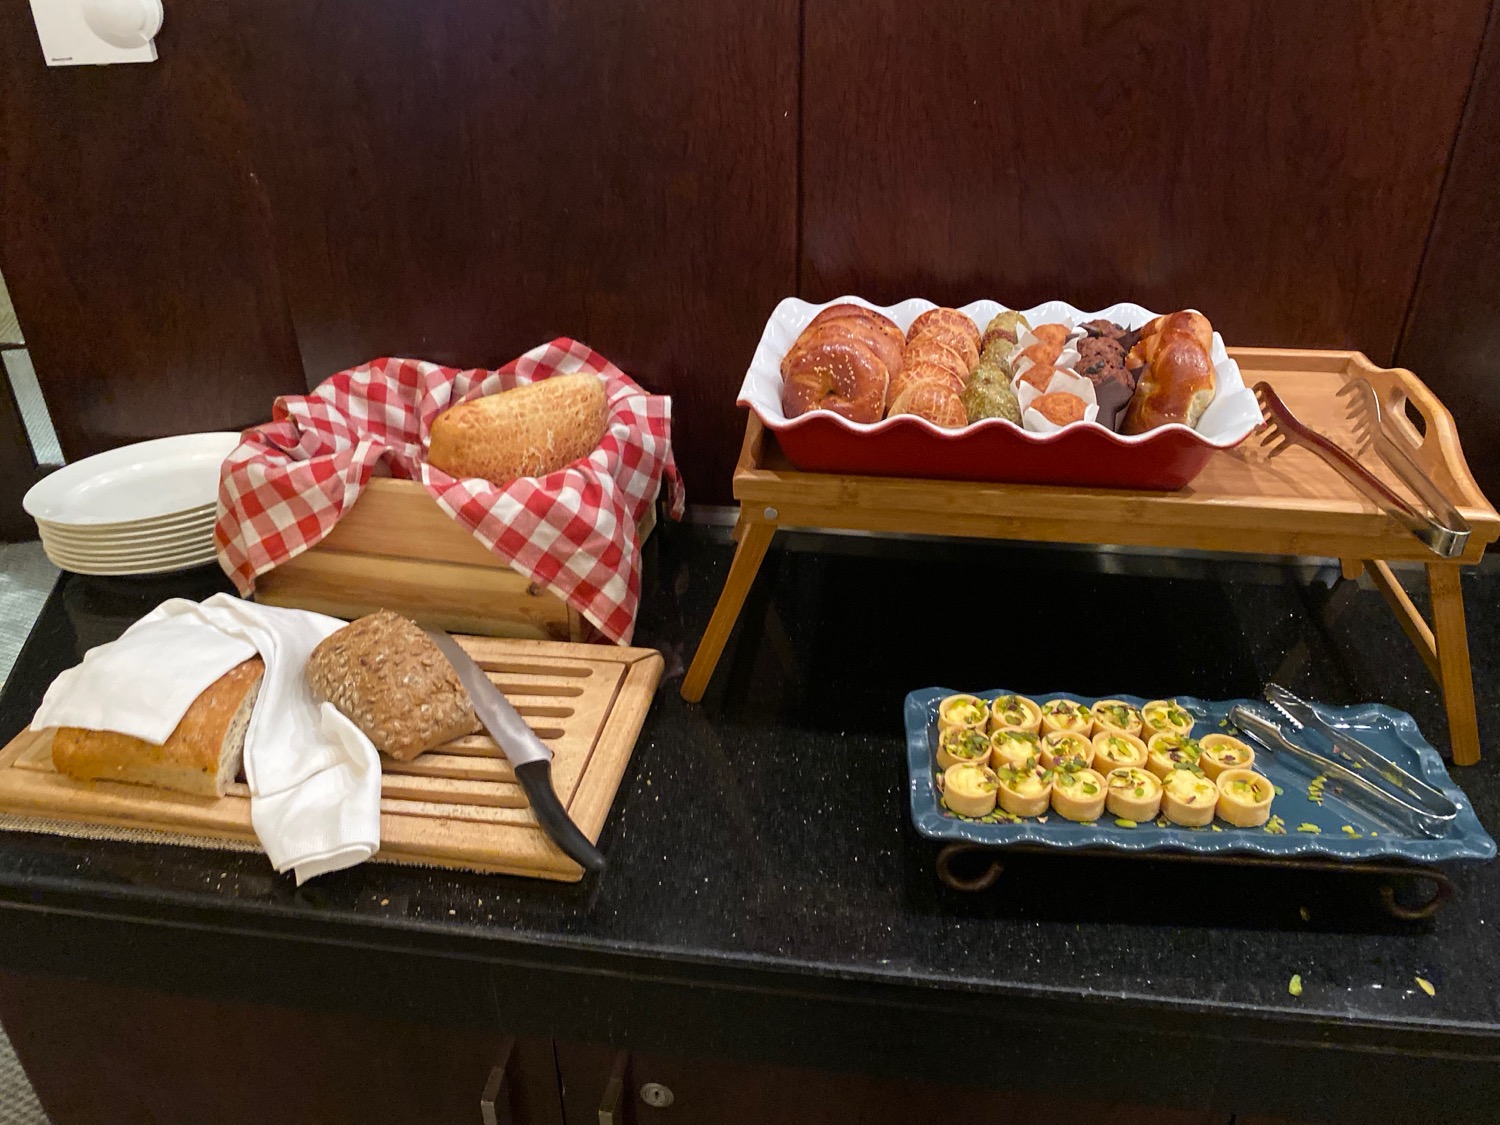 a tray of pastries and bread on a counter